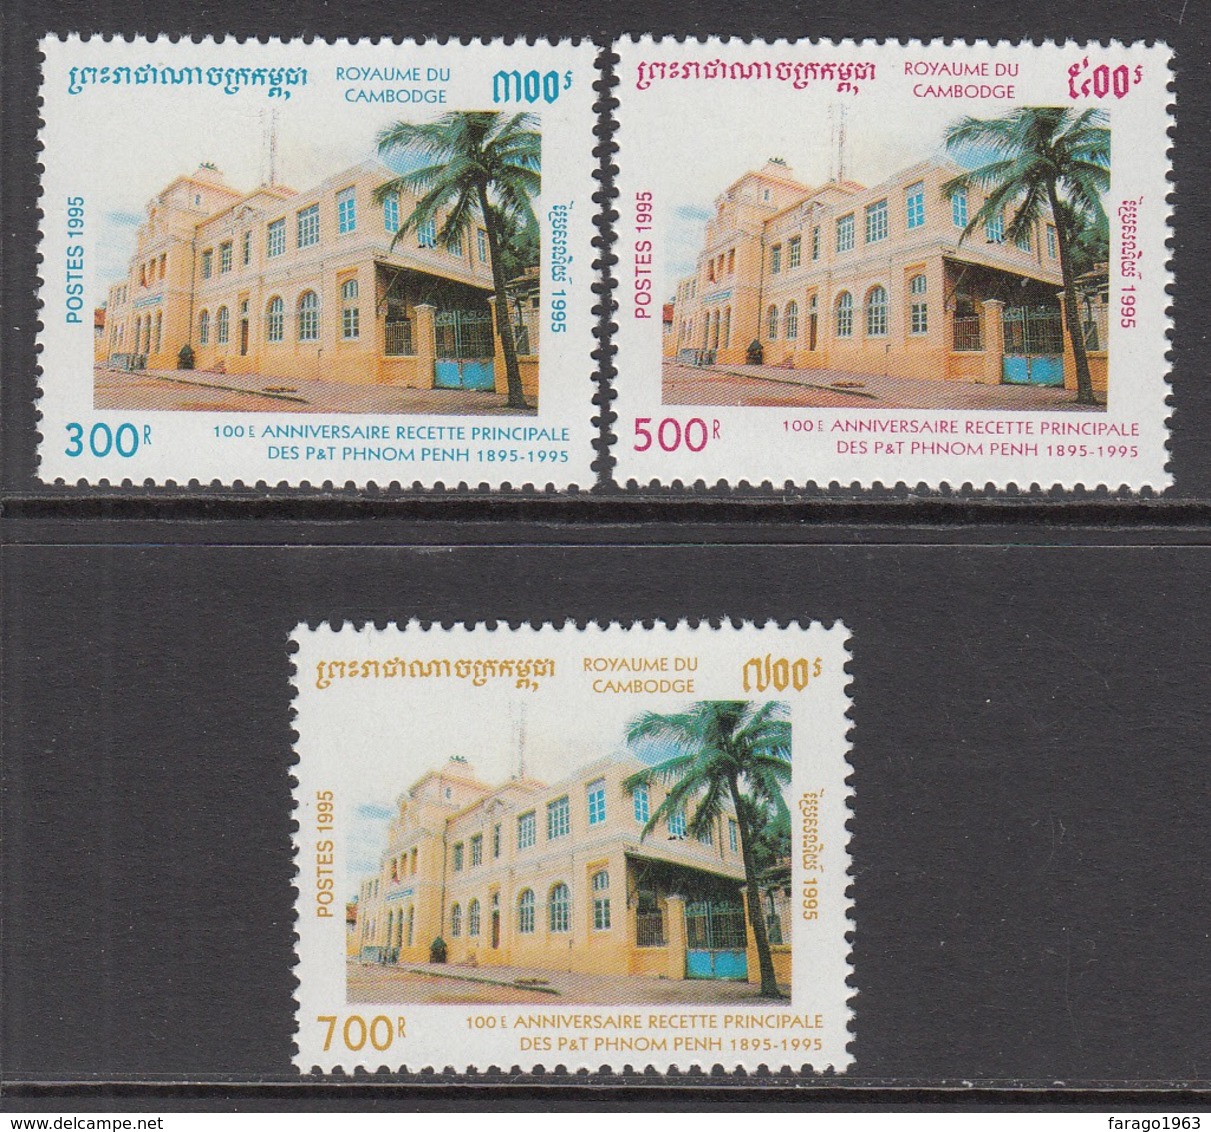 1995 Cambodia Post Office Architecture Complete Set Of 3 MNH - Cambodja